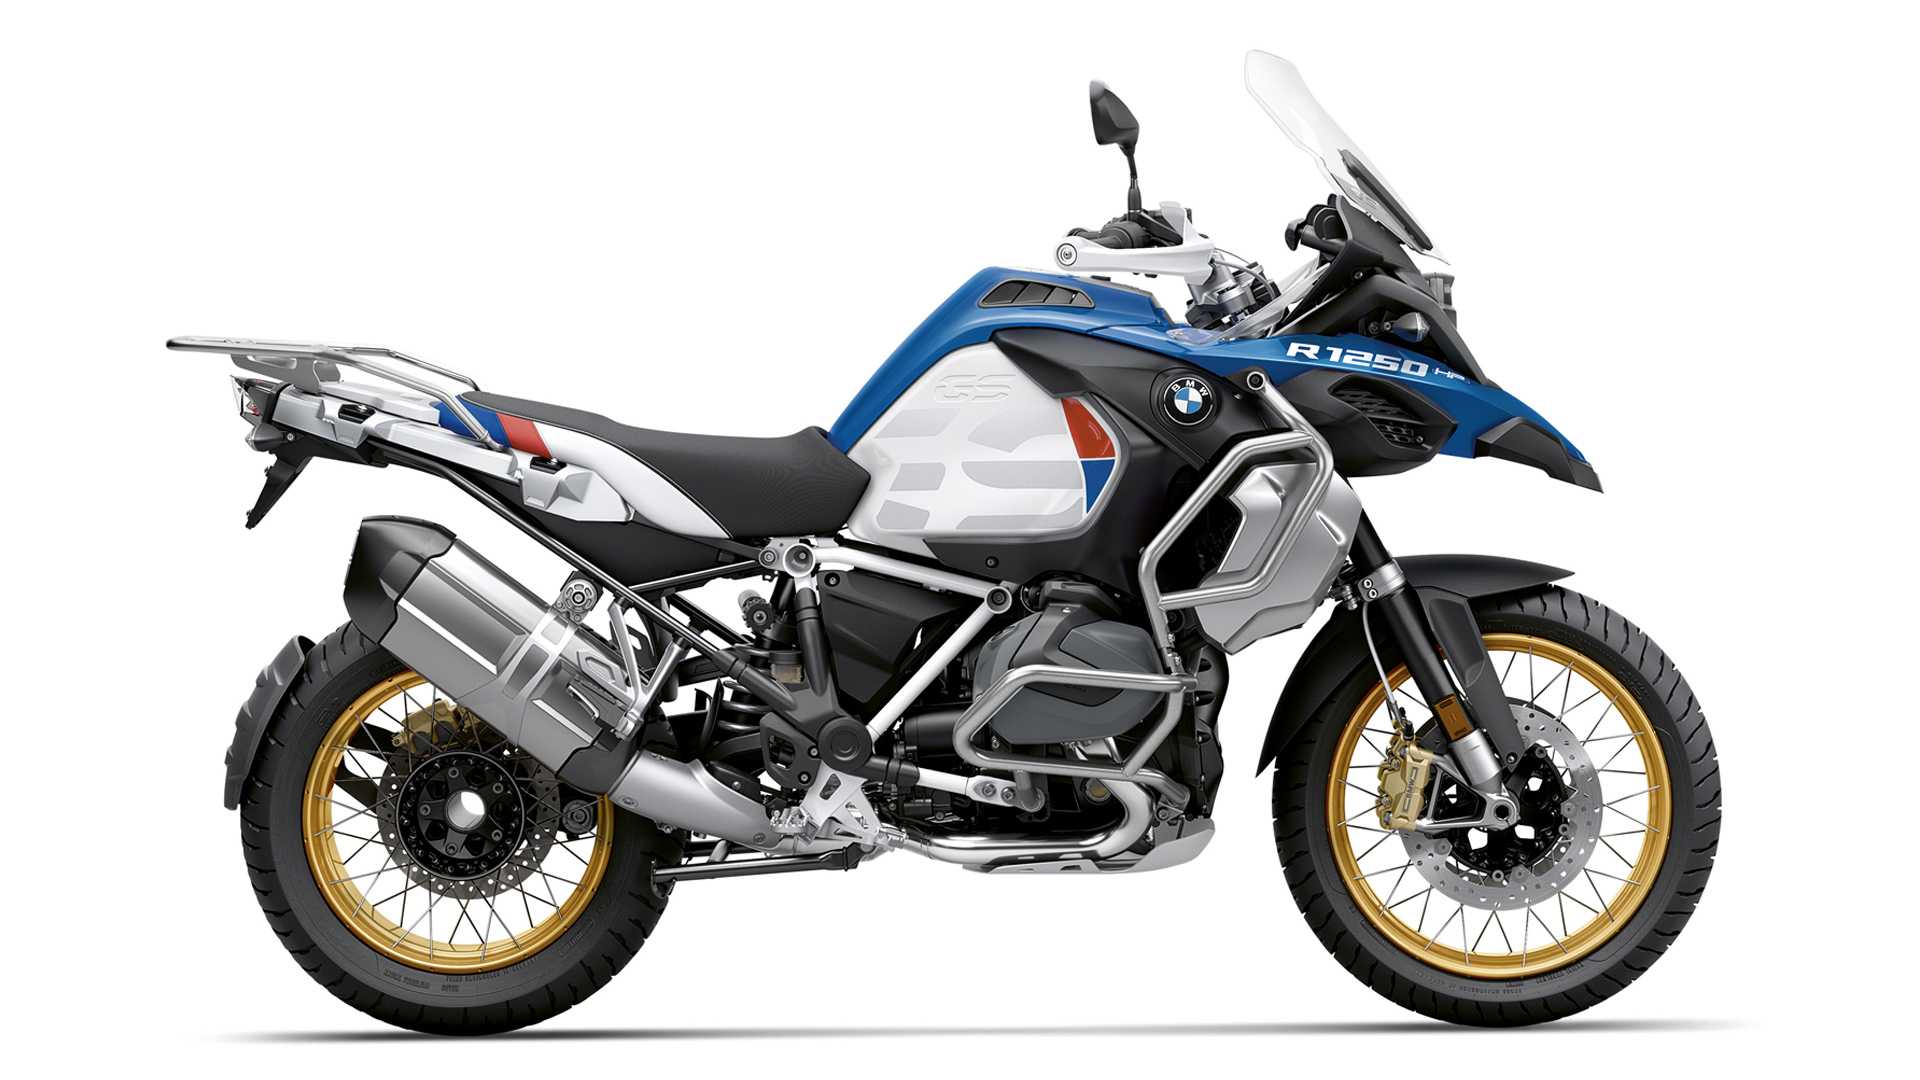 BMW R 1250 GS: Everything We Know